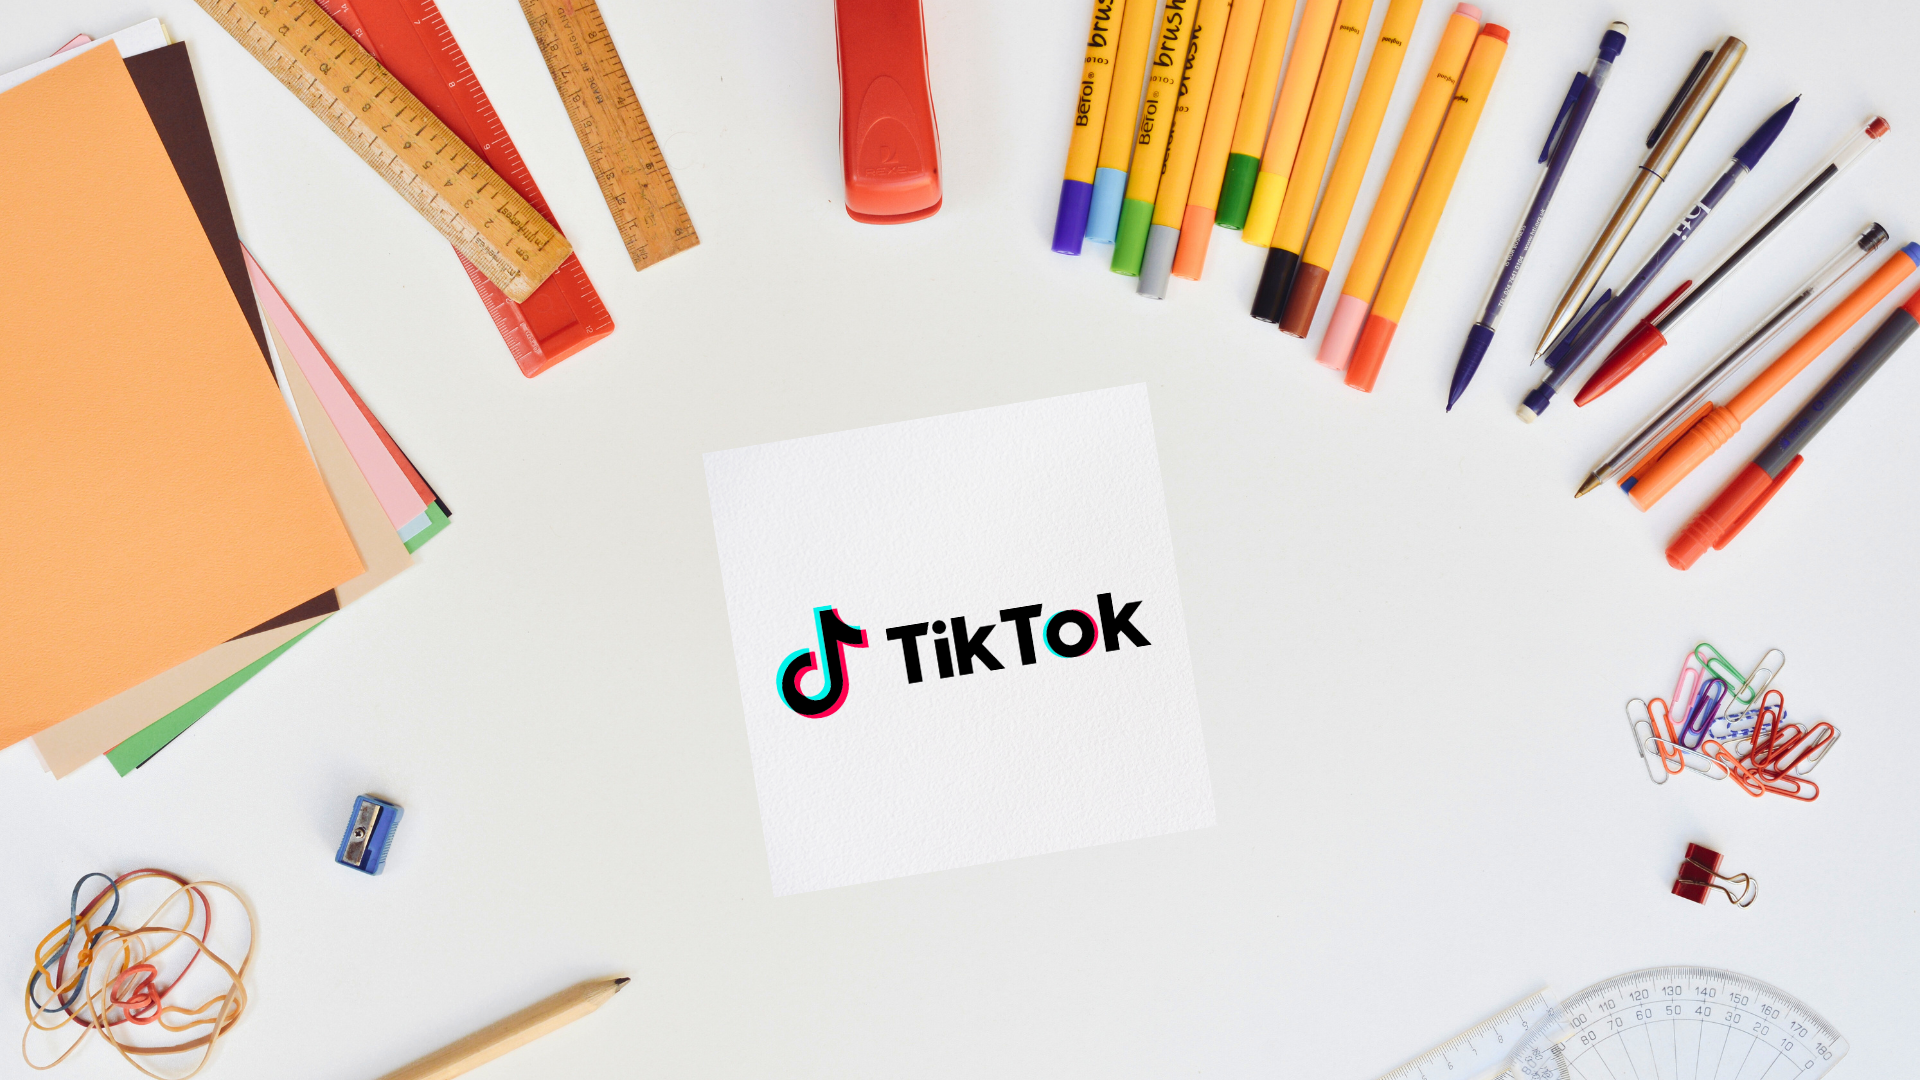 TikTok Launches STEM Education Feed in Europe